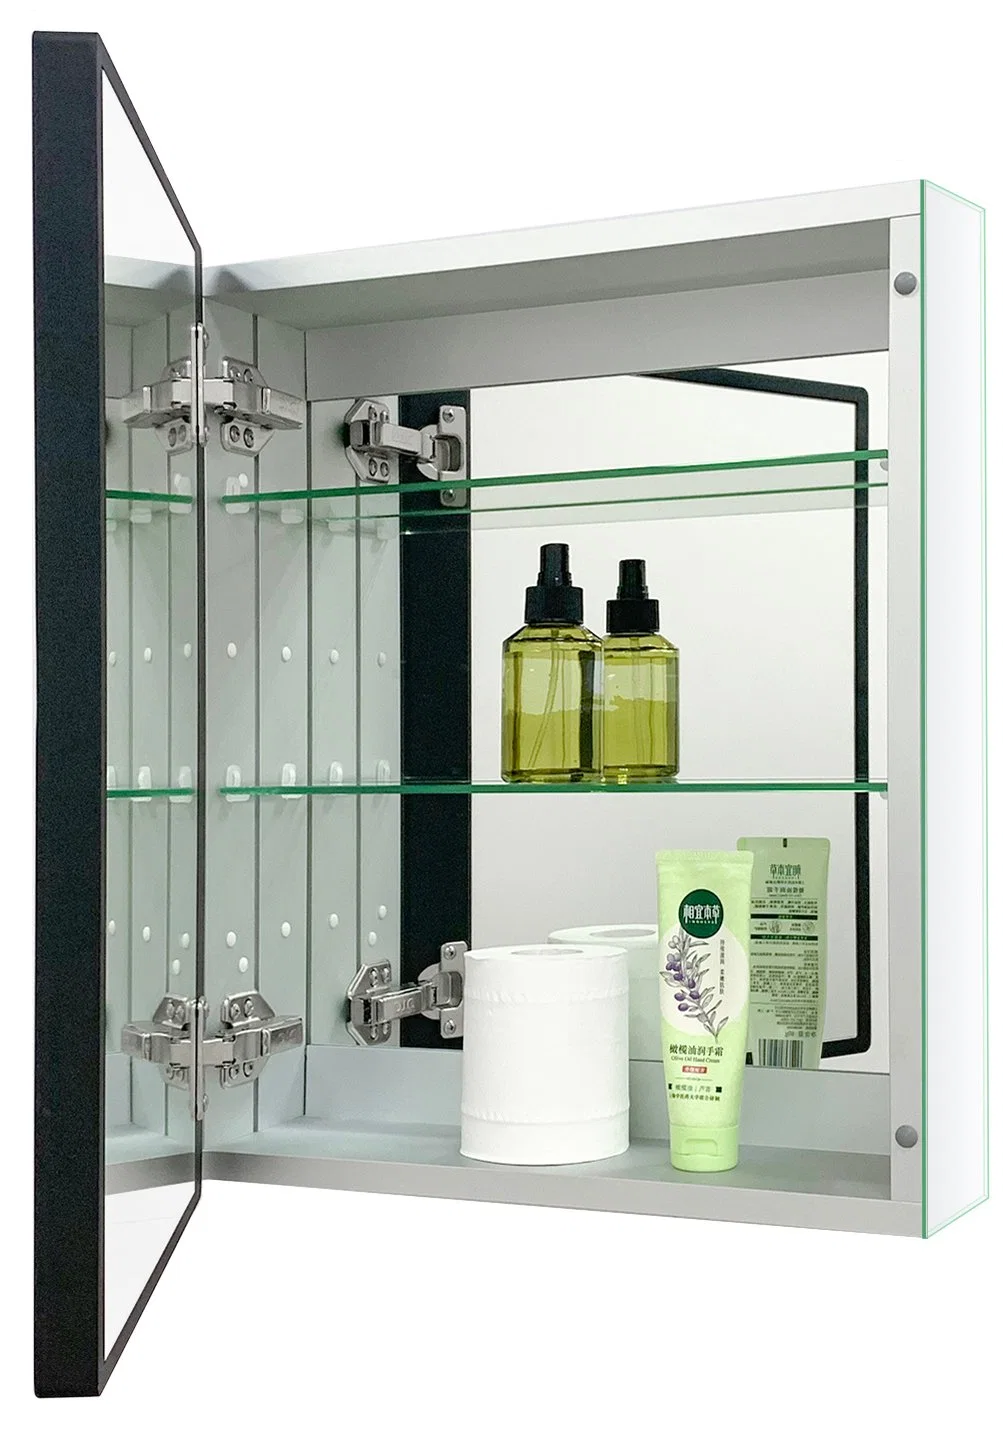 Black Frame 26 Inch X 16 Inch Aluminum Bathroom Medicine Cabinet Recess or Surface Mount Can Be Installed with Left or Right-Hand Swing